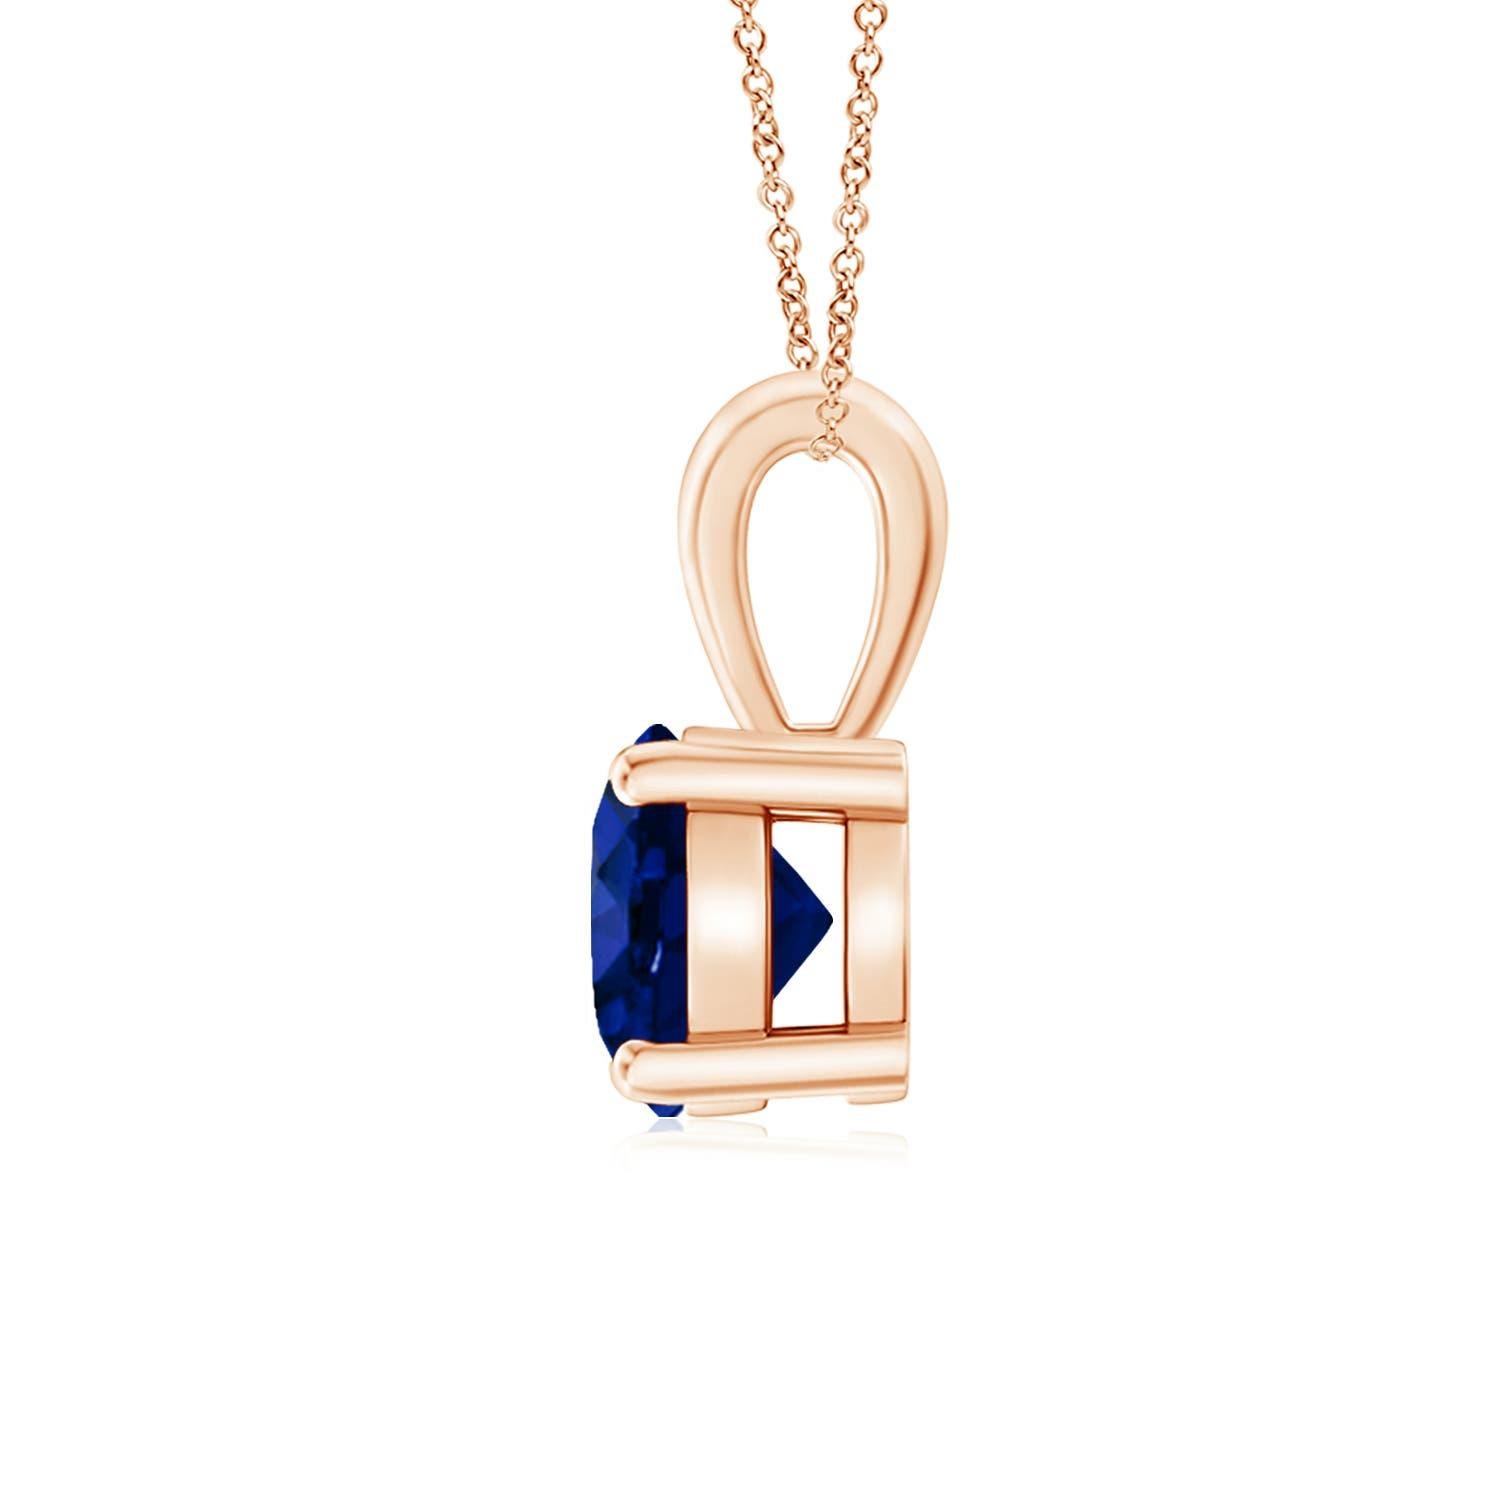 Drawing attention with its gorgeous hue and remarkable sheen is a GIA certified blue sapphire. The round sapphire is linked to a gleaming metal bale. Crafted in 18k rose gold, this prong-set sapphire solitaire pendant is simply alluring.
